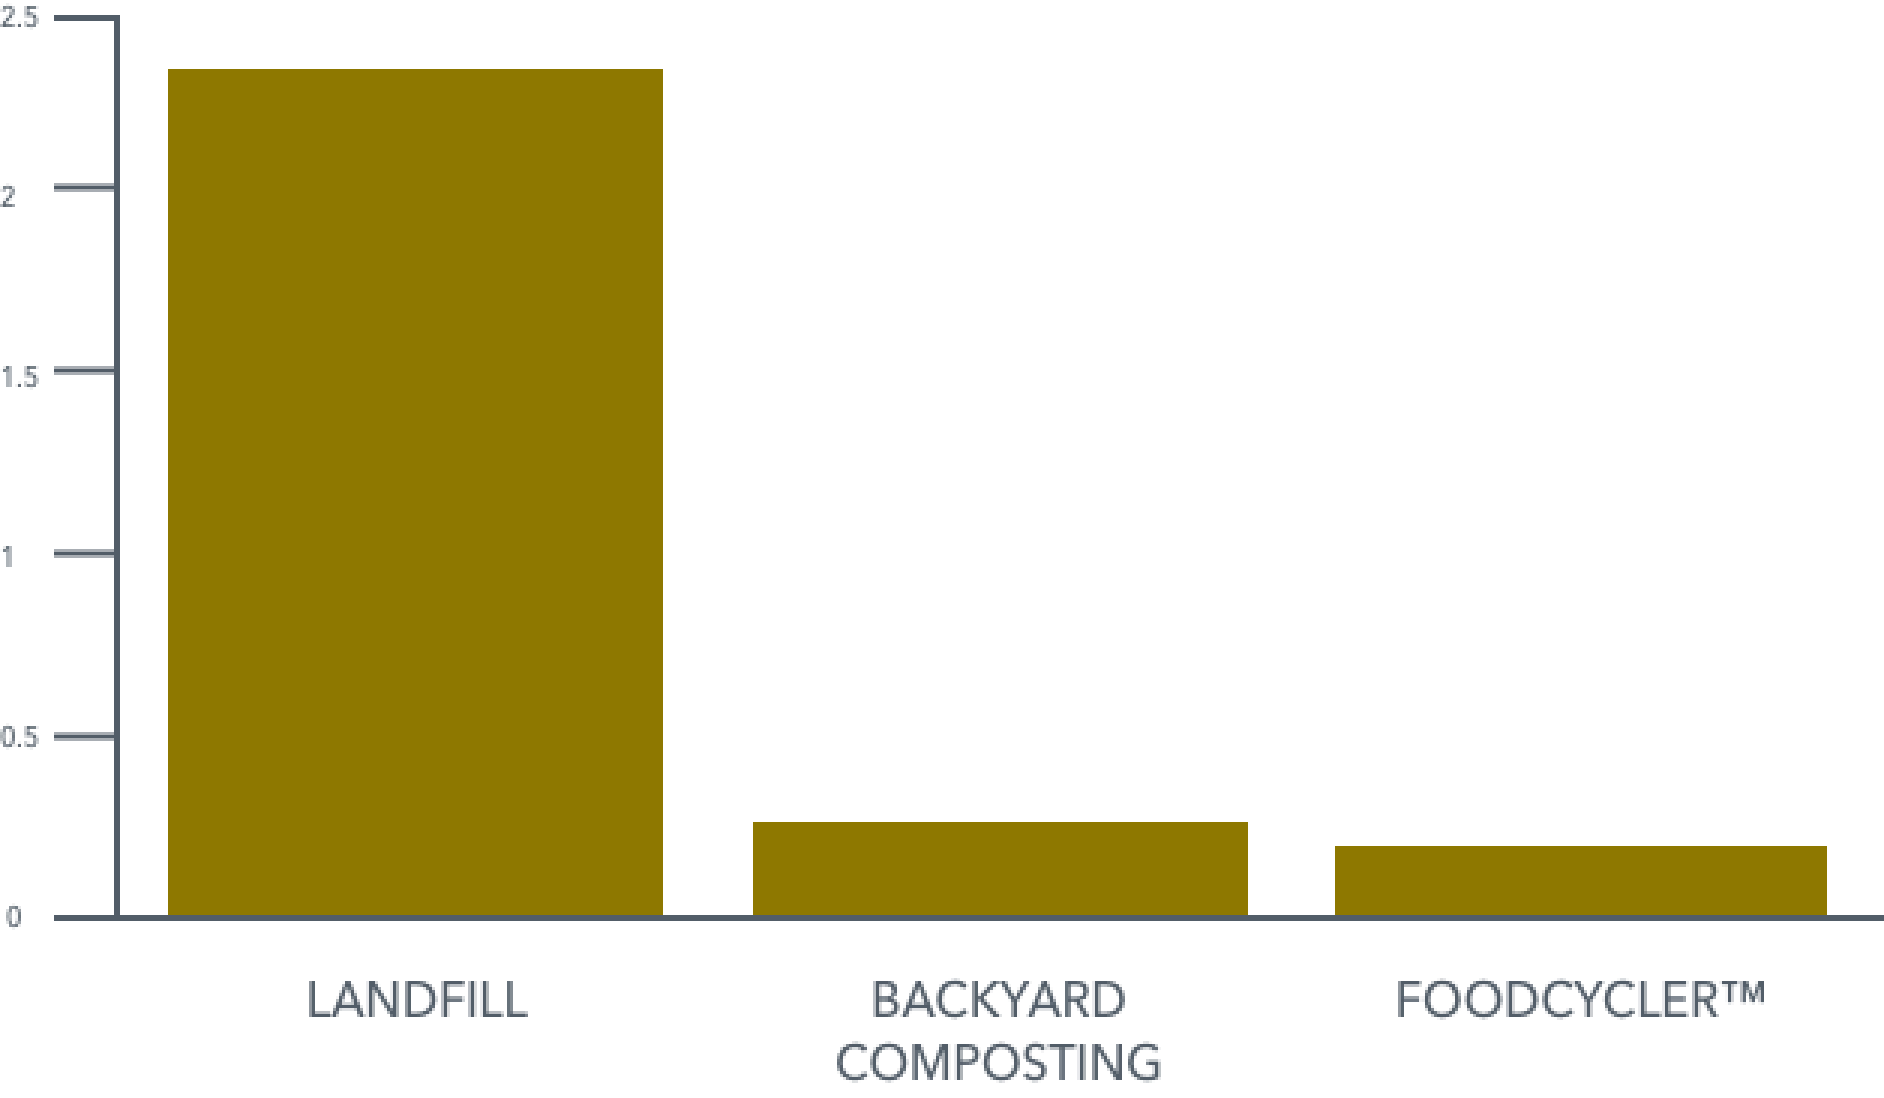 Graph showing amount of C02 released per kg of food waster for each method. From highest to lowest: Landfill, Backyard Composting, Foodcycler